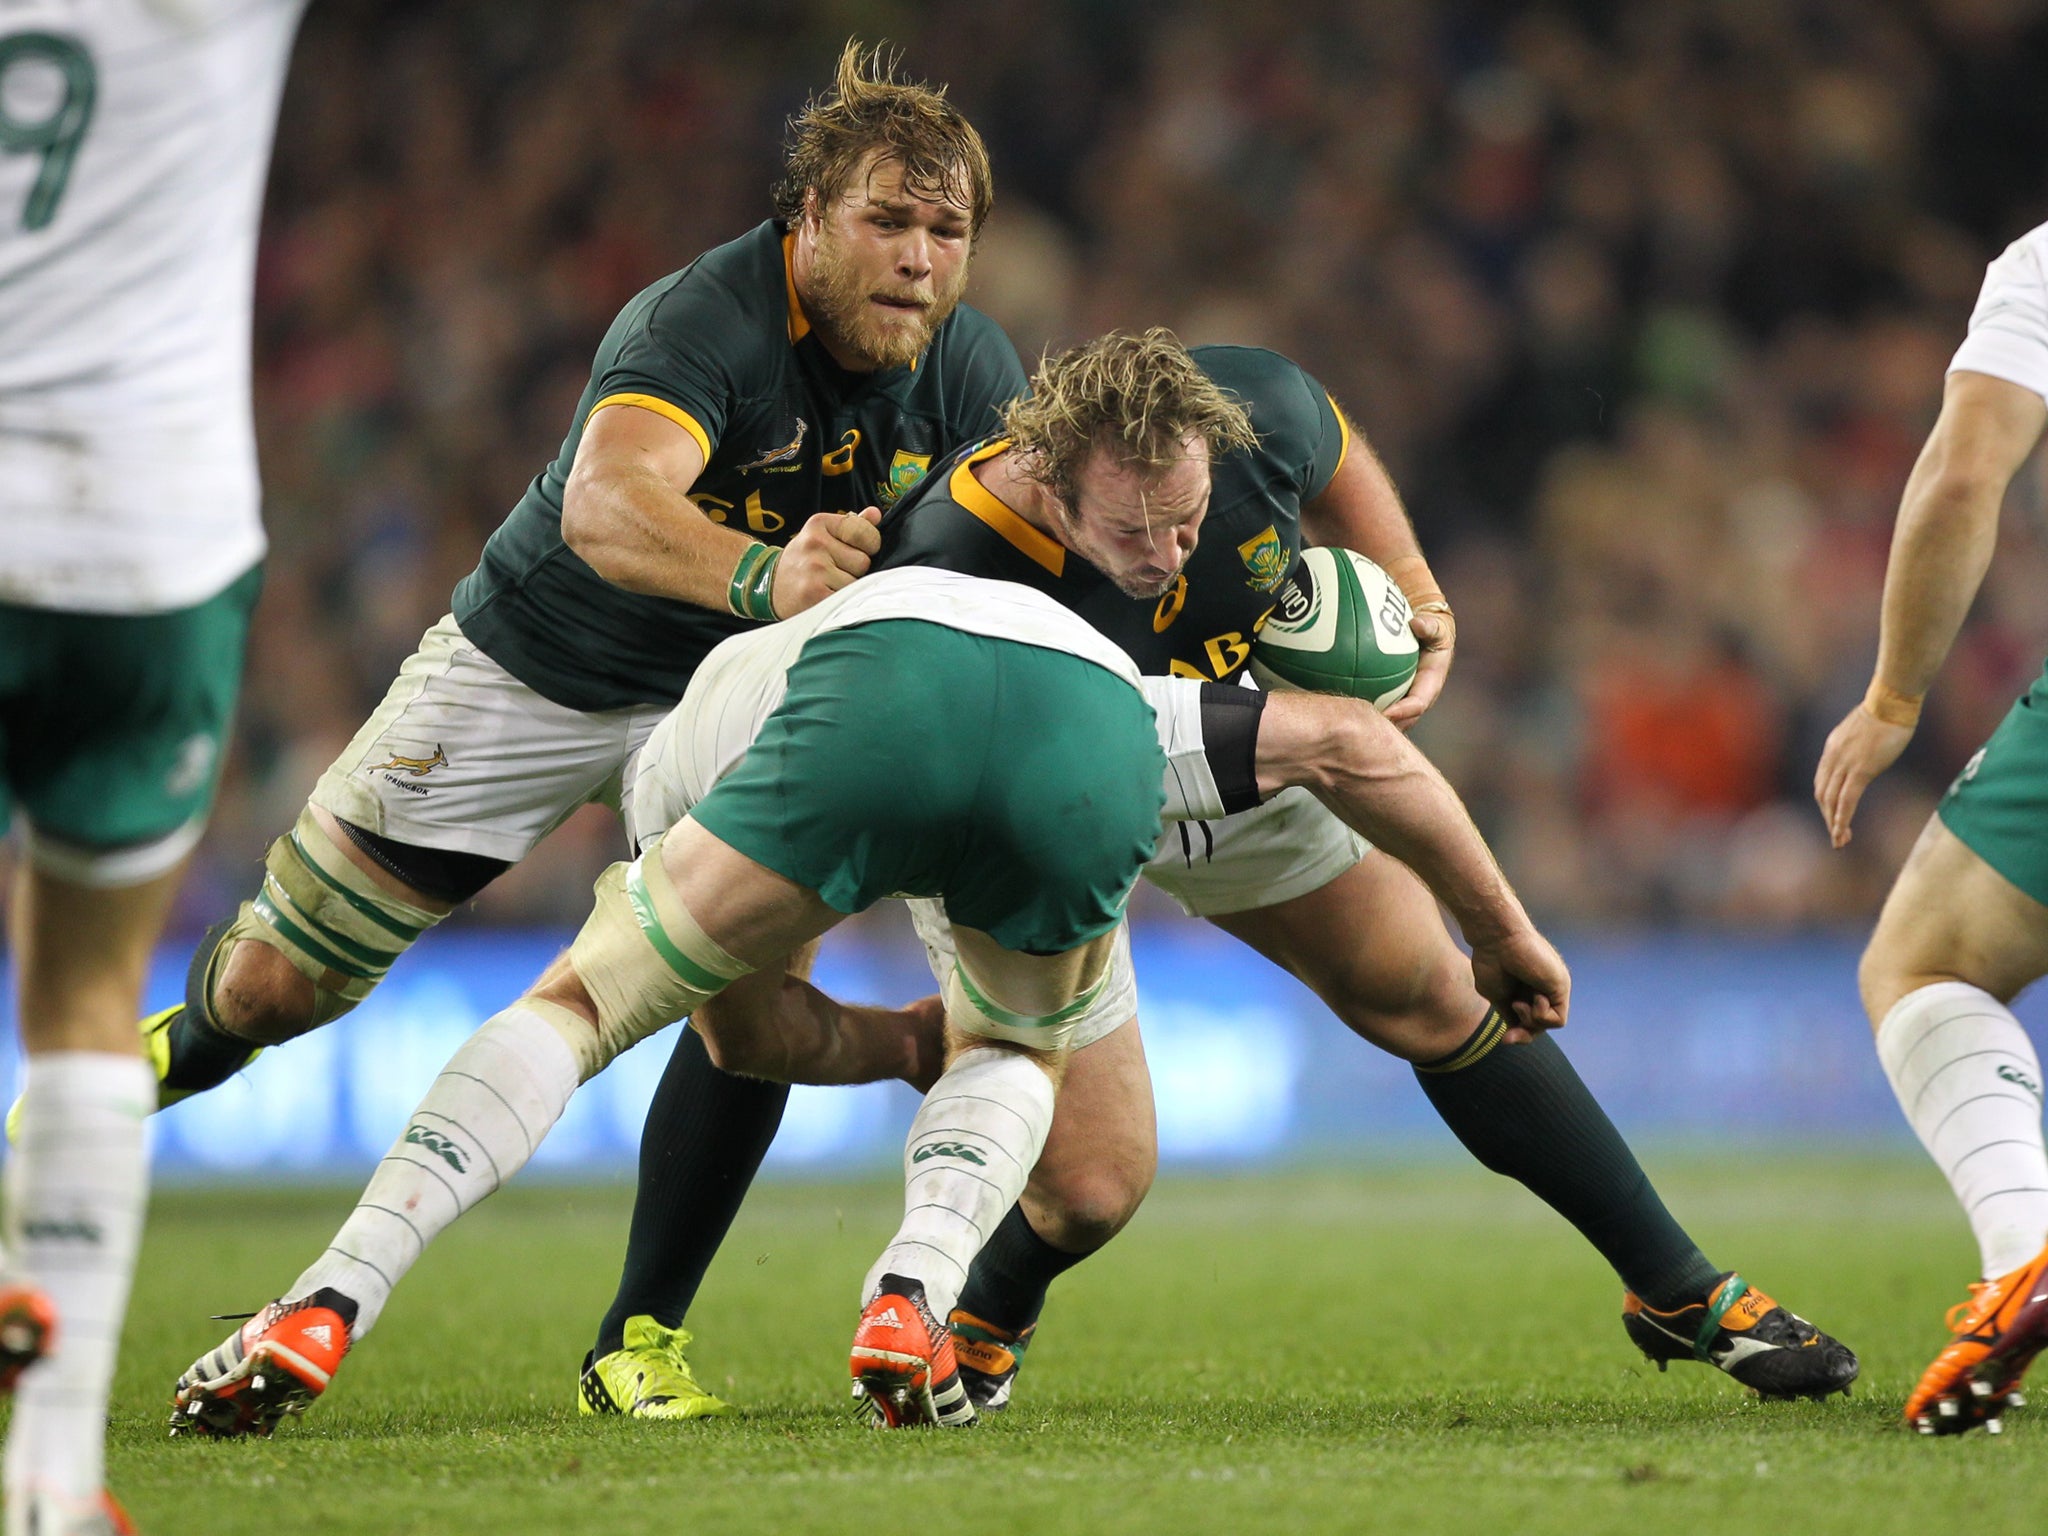 Jannie Du Plessis and Duane Vermeulen on the attack for South Africa during the 2014 Guinness series International match between Ireland and South Africa